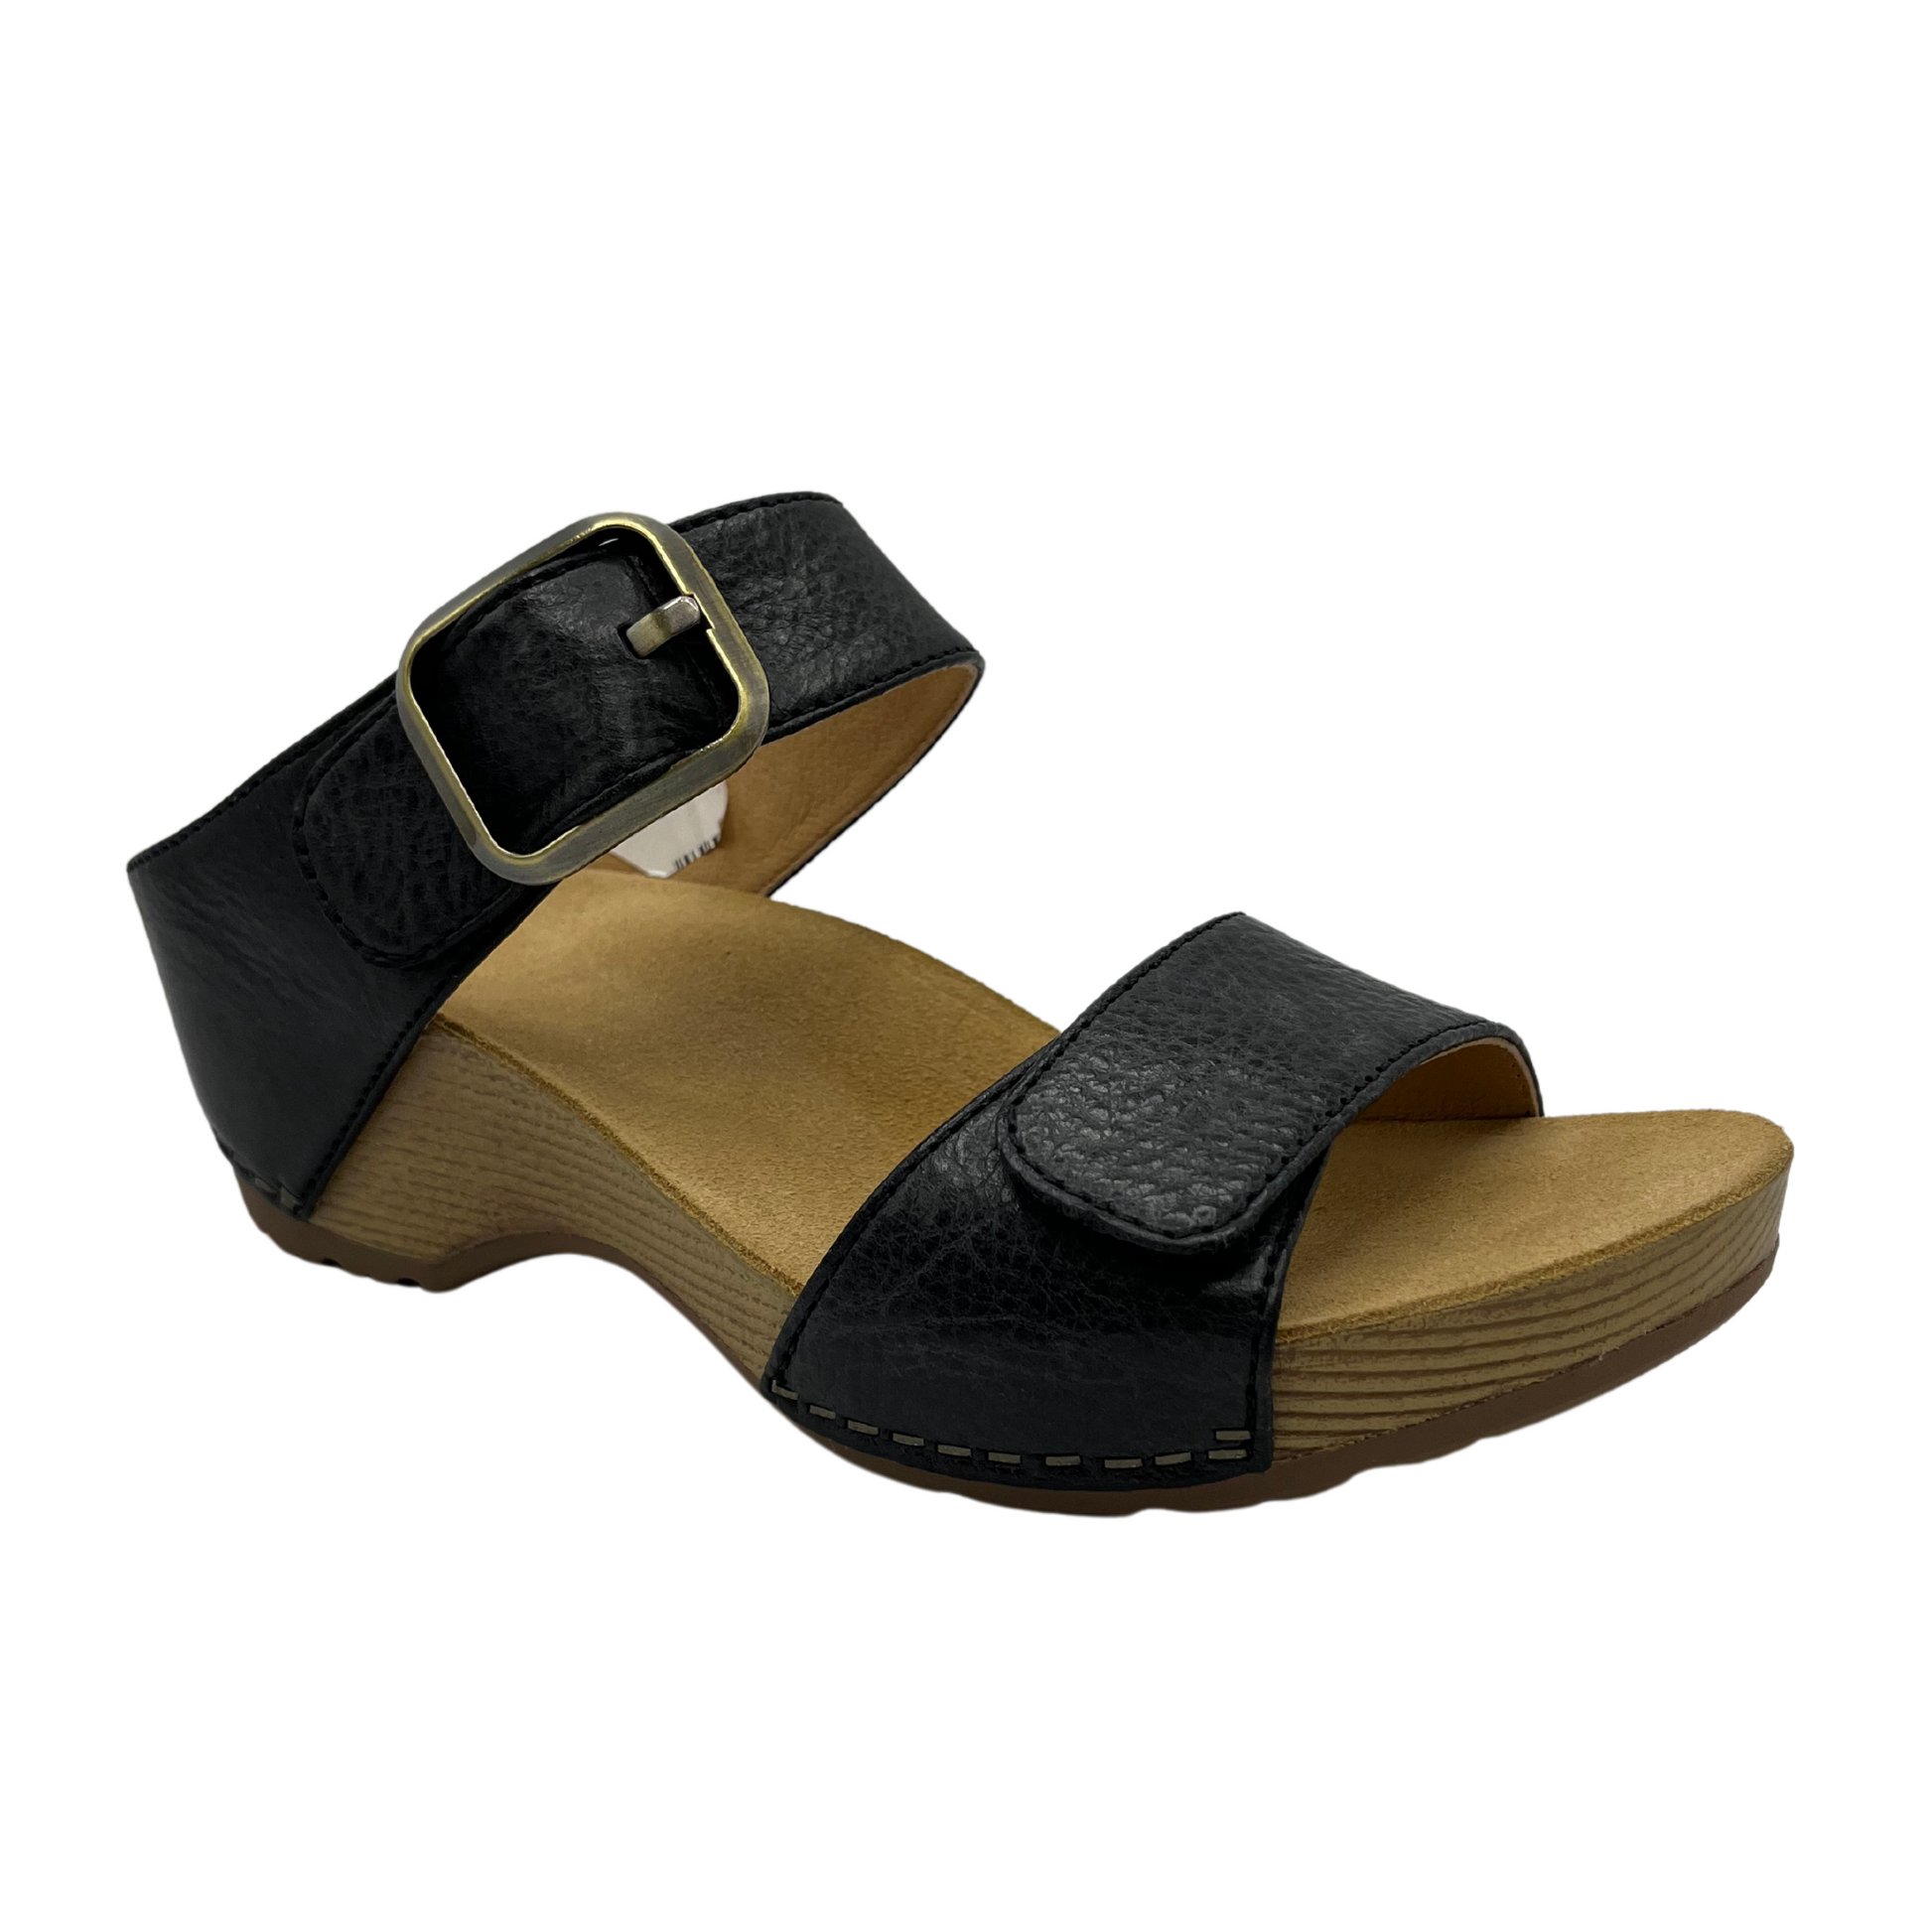 45 degree angled view of black leather strapped sandal in a slip on style with a buckle strap and tan lining